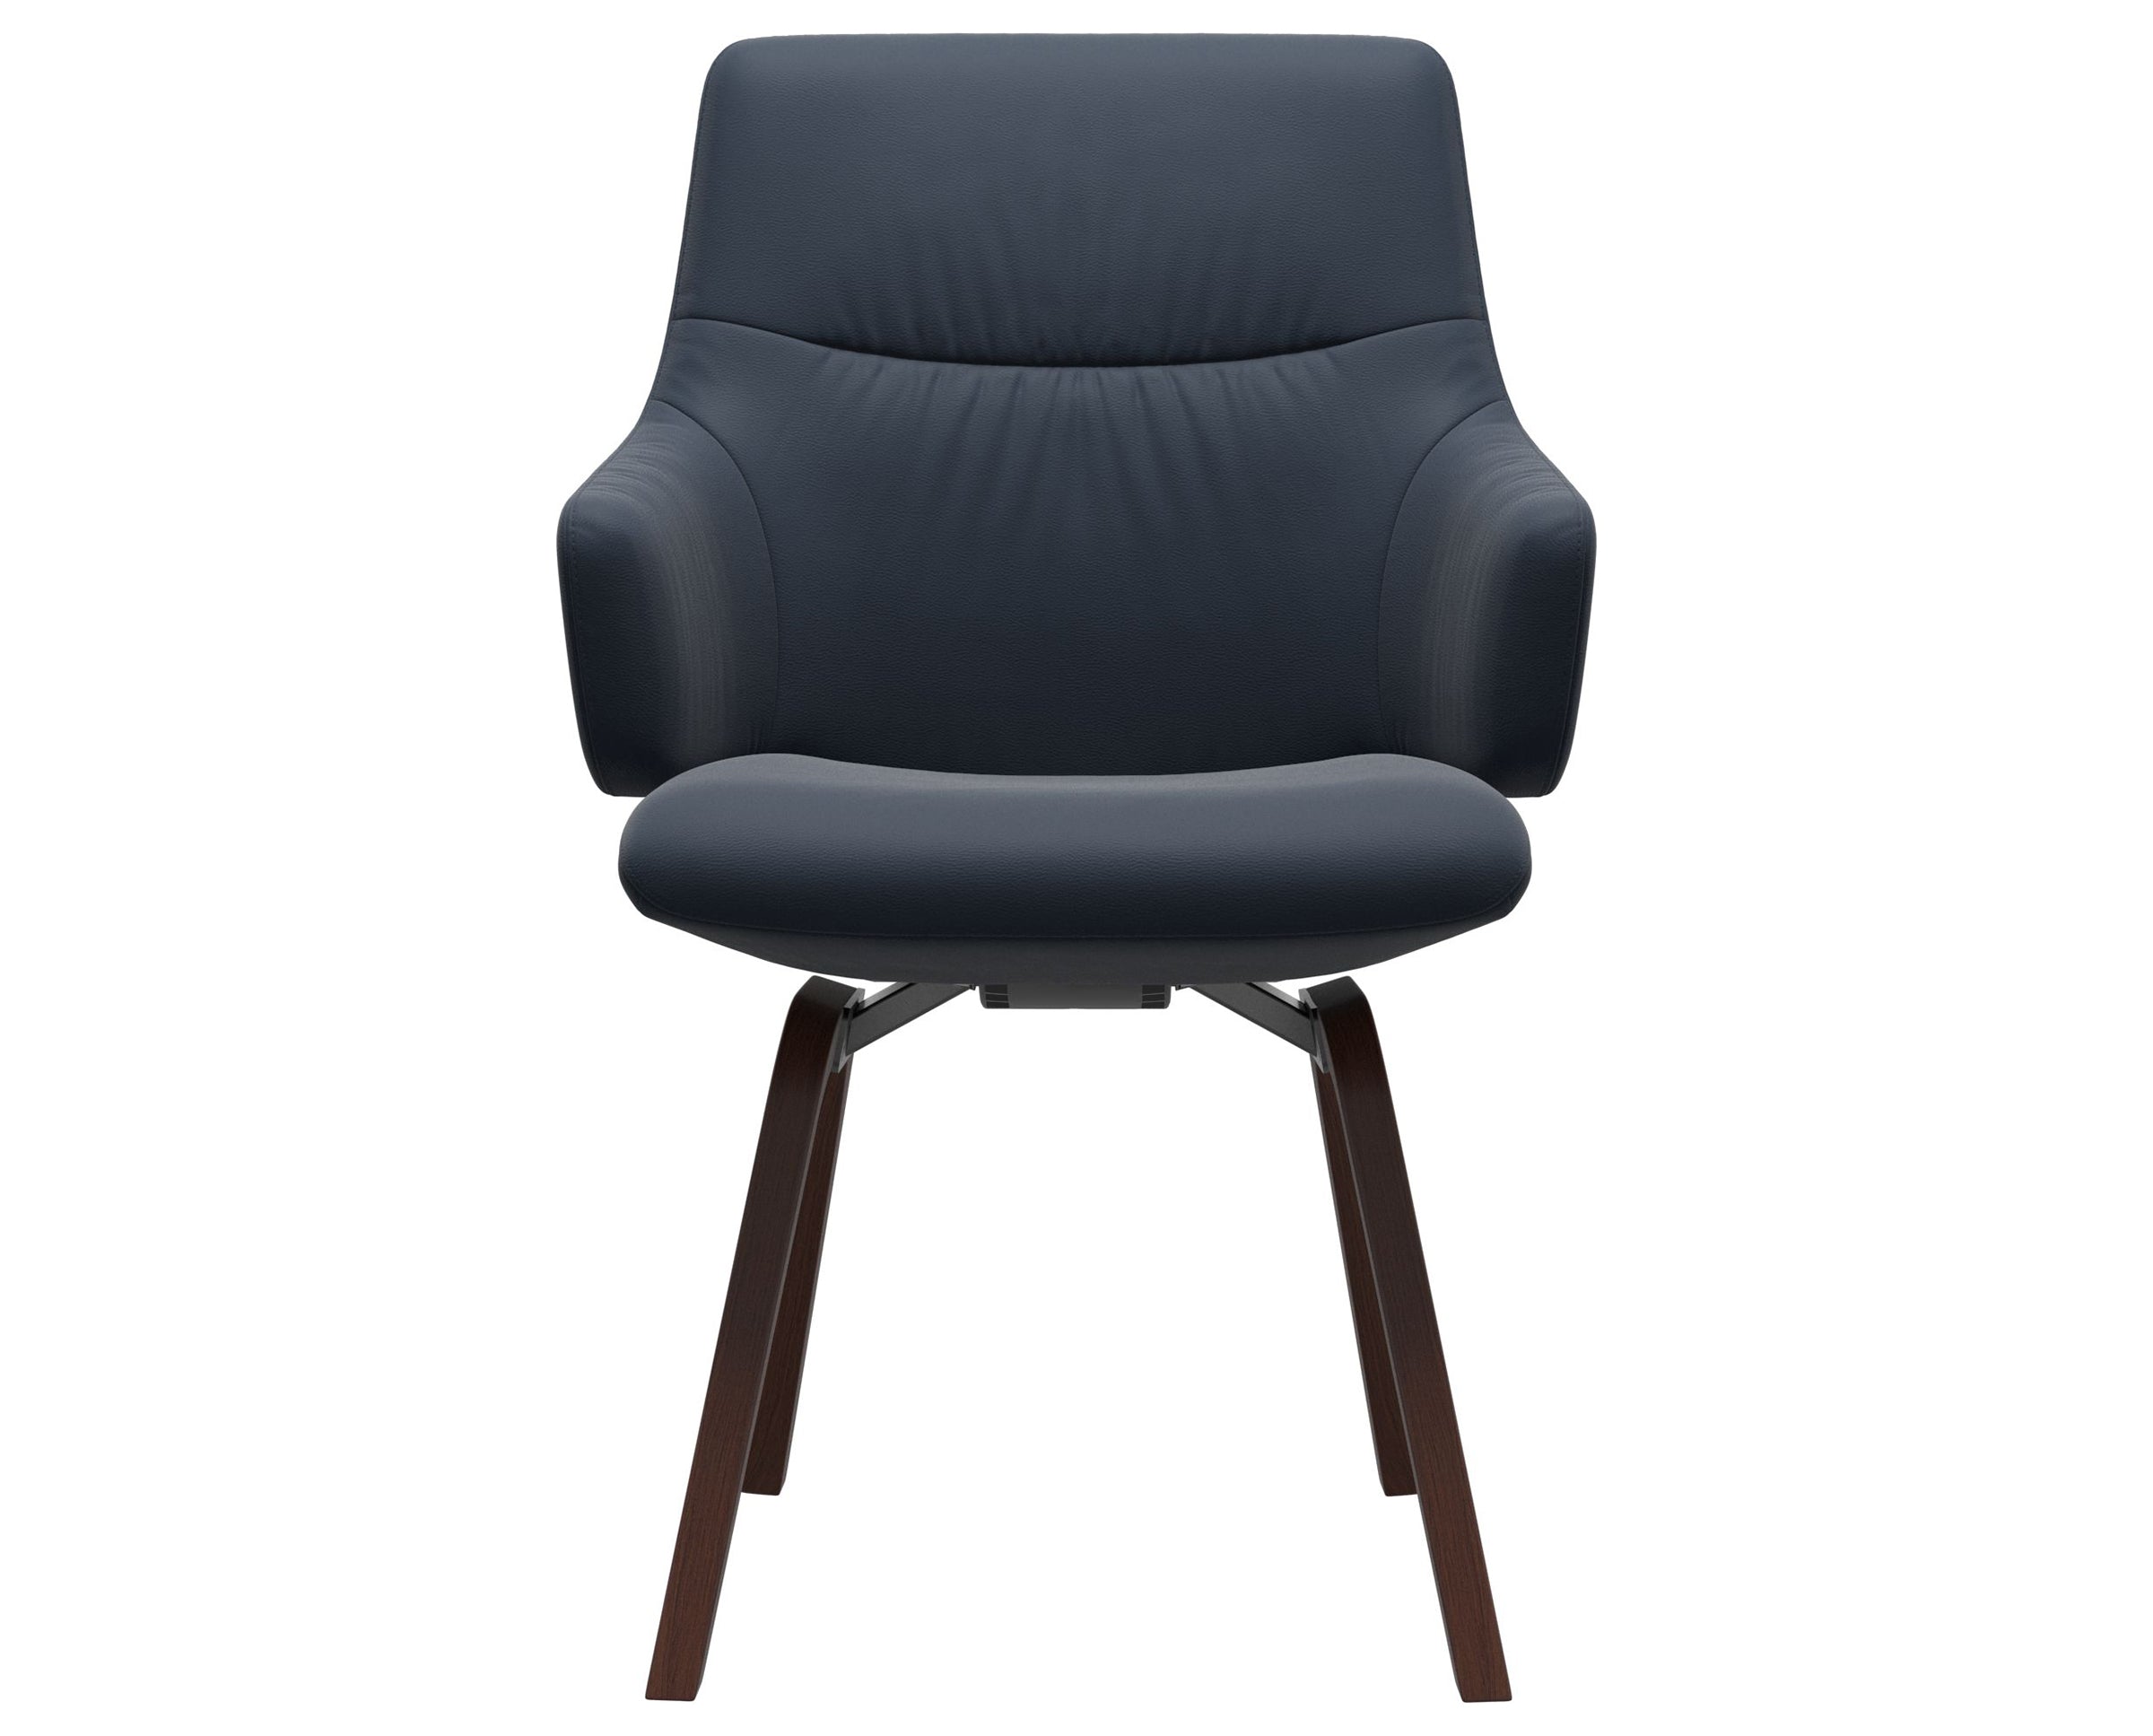 Paloma Leather Oxford Blue and Walnut Base | Stressless Mint Low Back D200 Dining Chair w/Arms | Valley Ridge Furniture